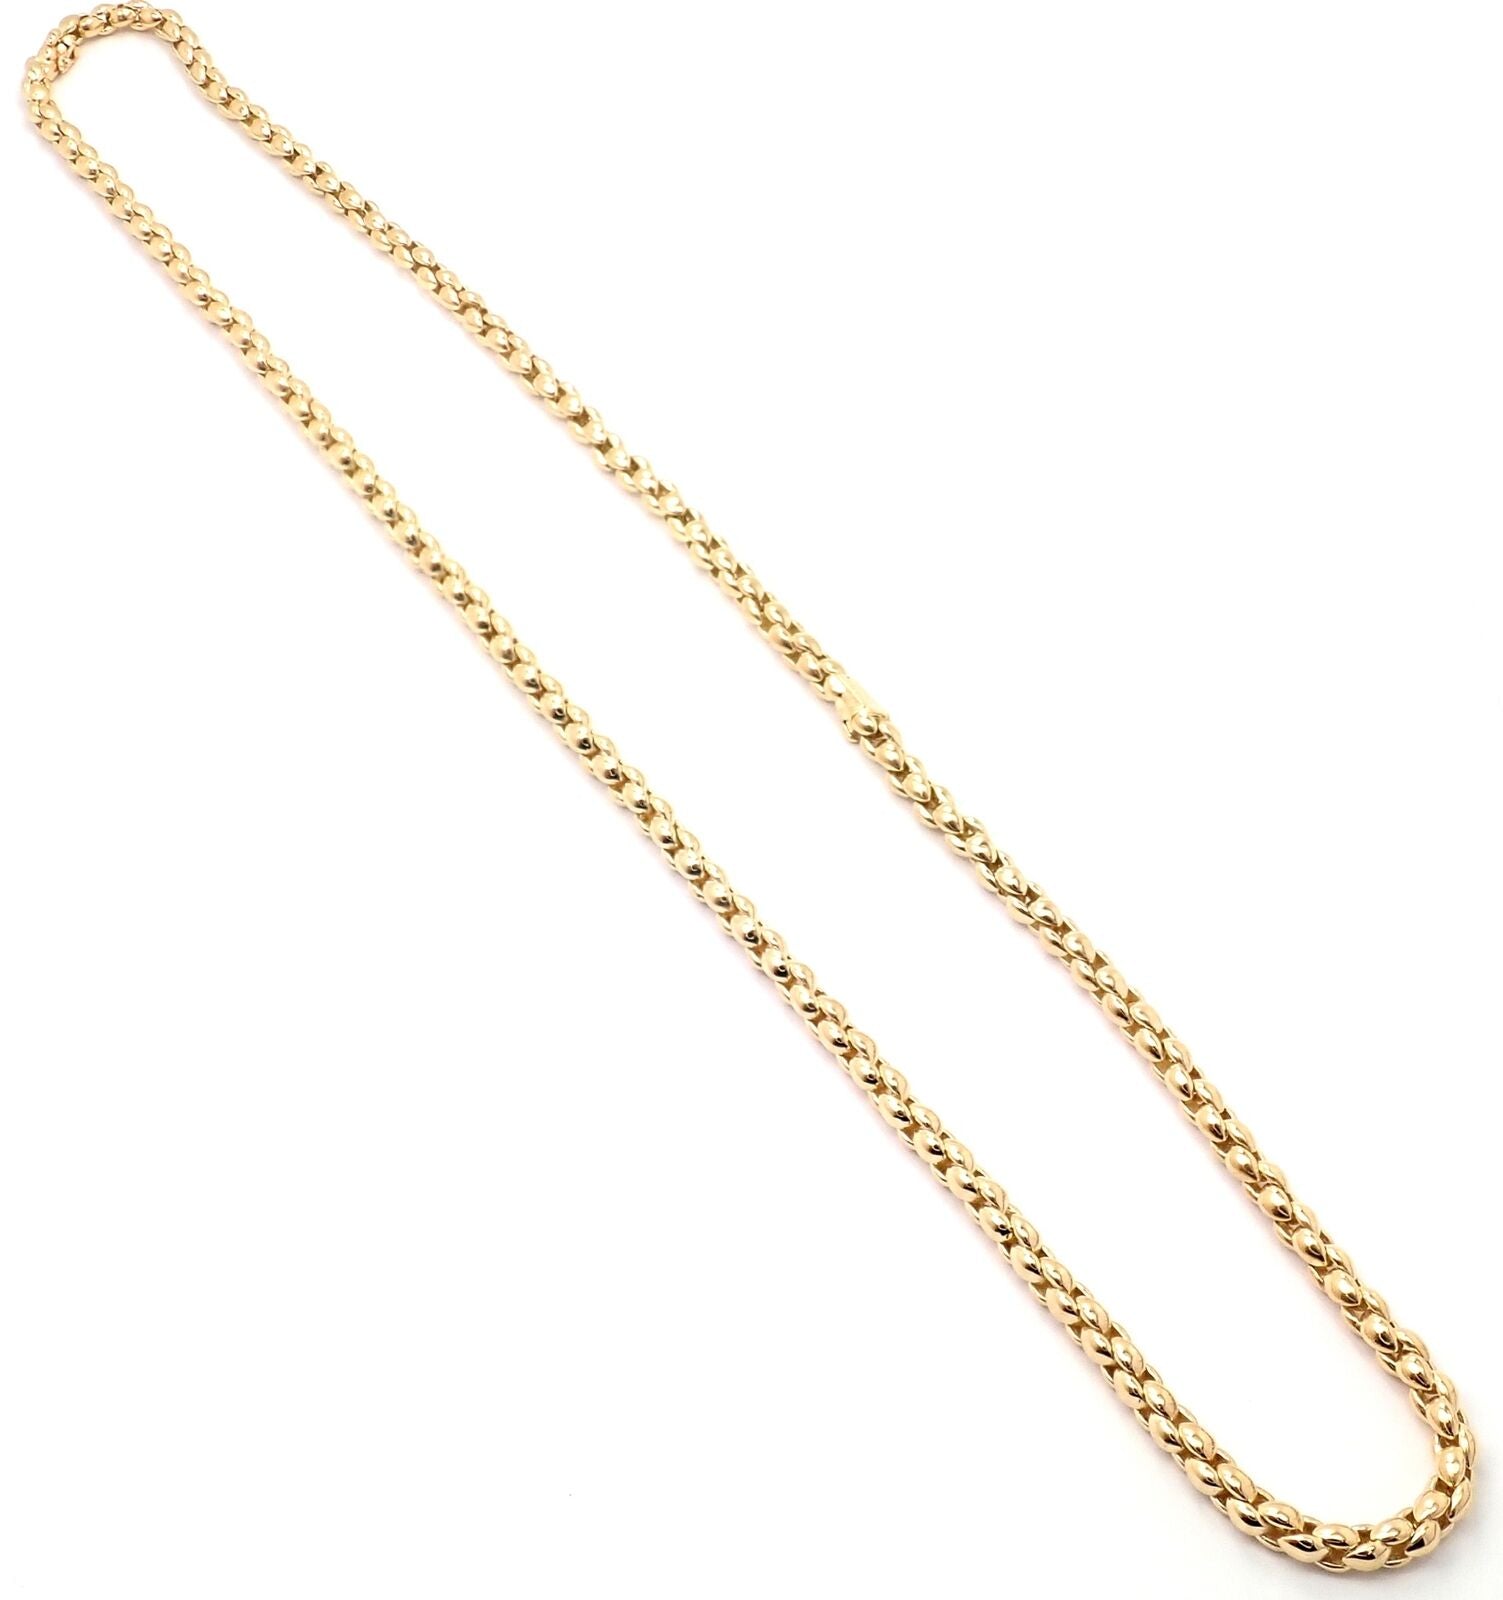 Cartier Love Necklace - 95 For Sale on 1stDibs  love necklace gold, cartier  love bracelet necklace, cartier love necklace white gold